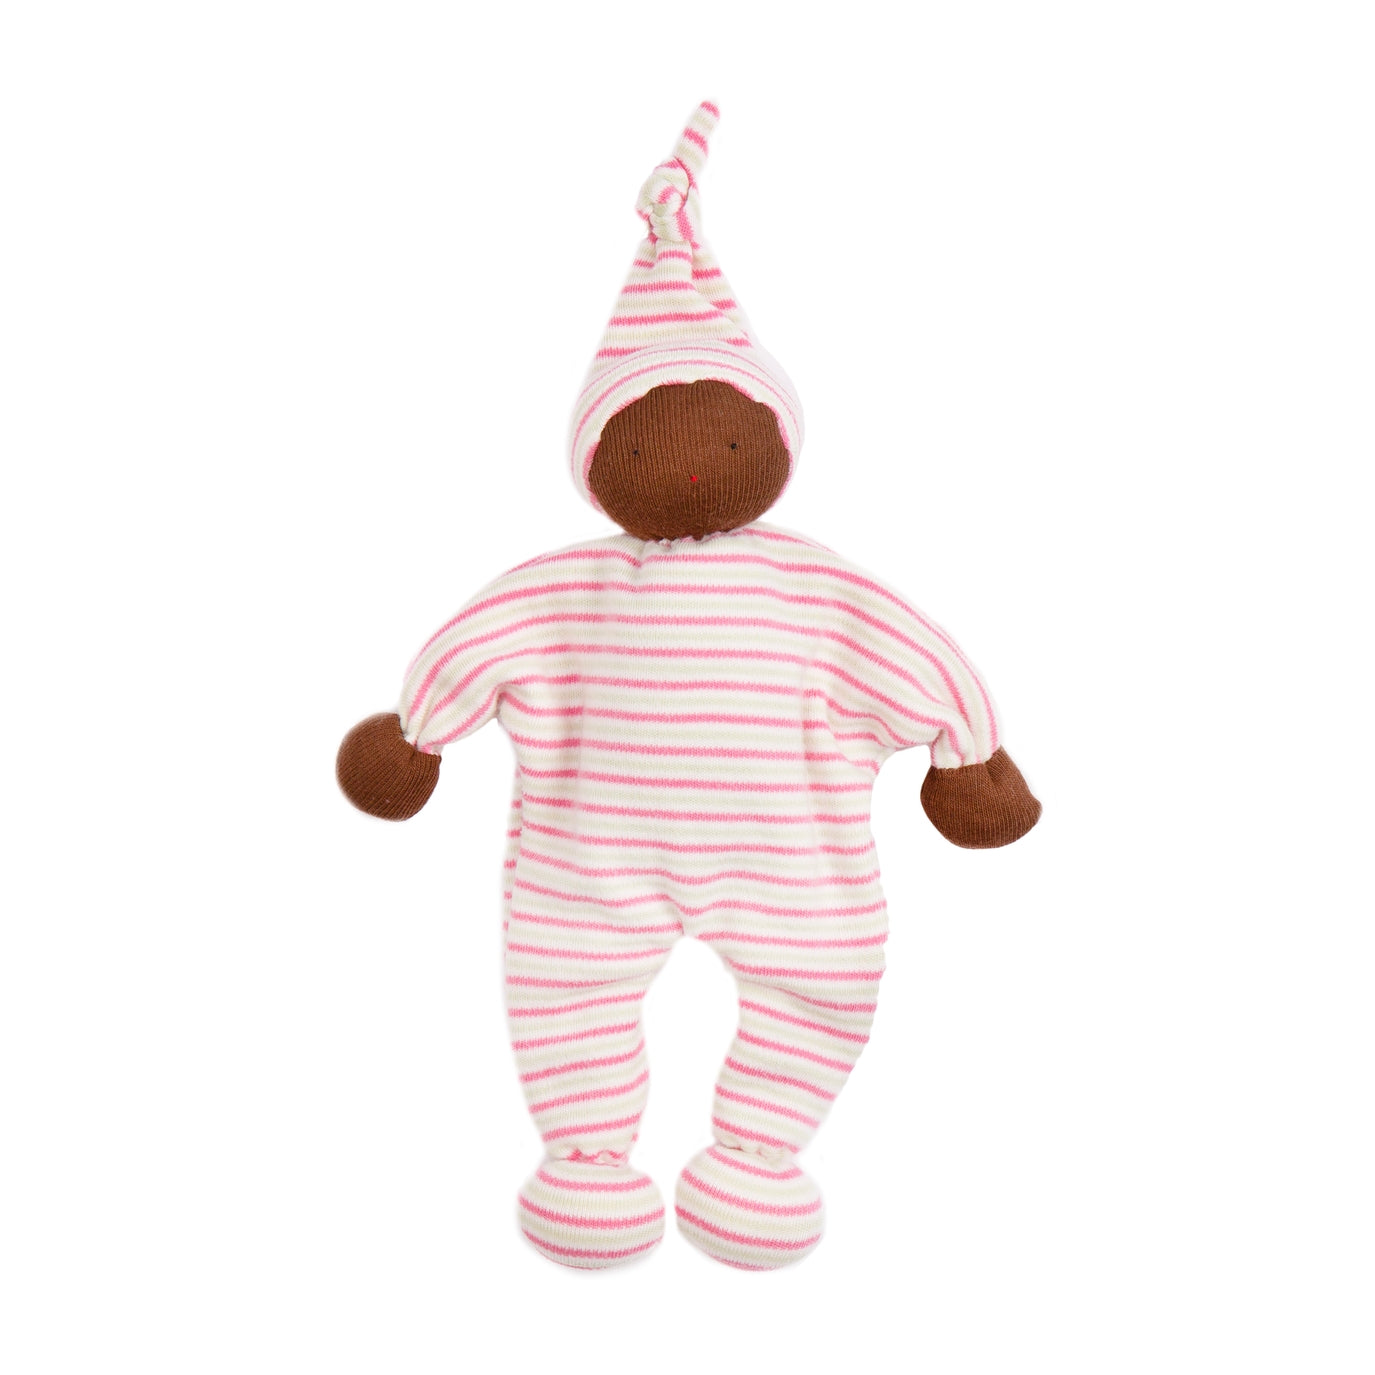 Striped Soft First Doll in pink